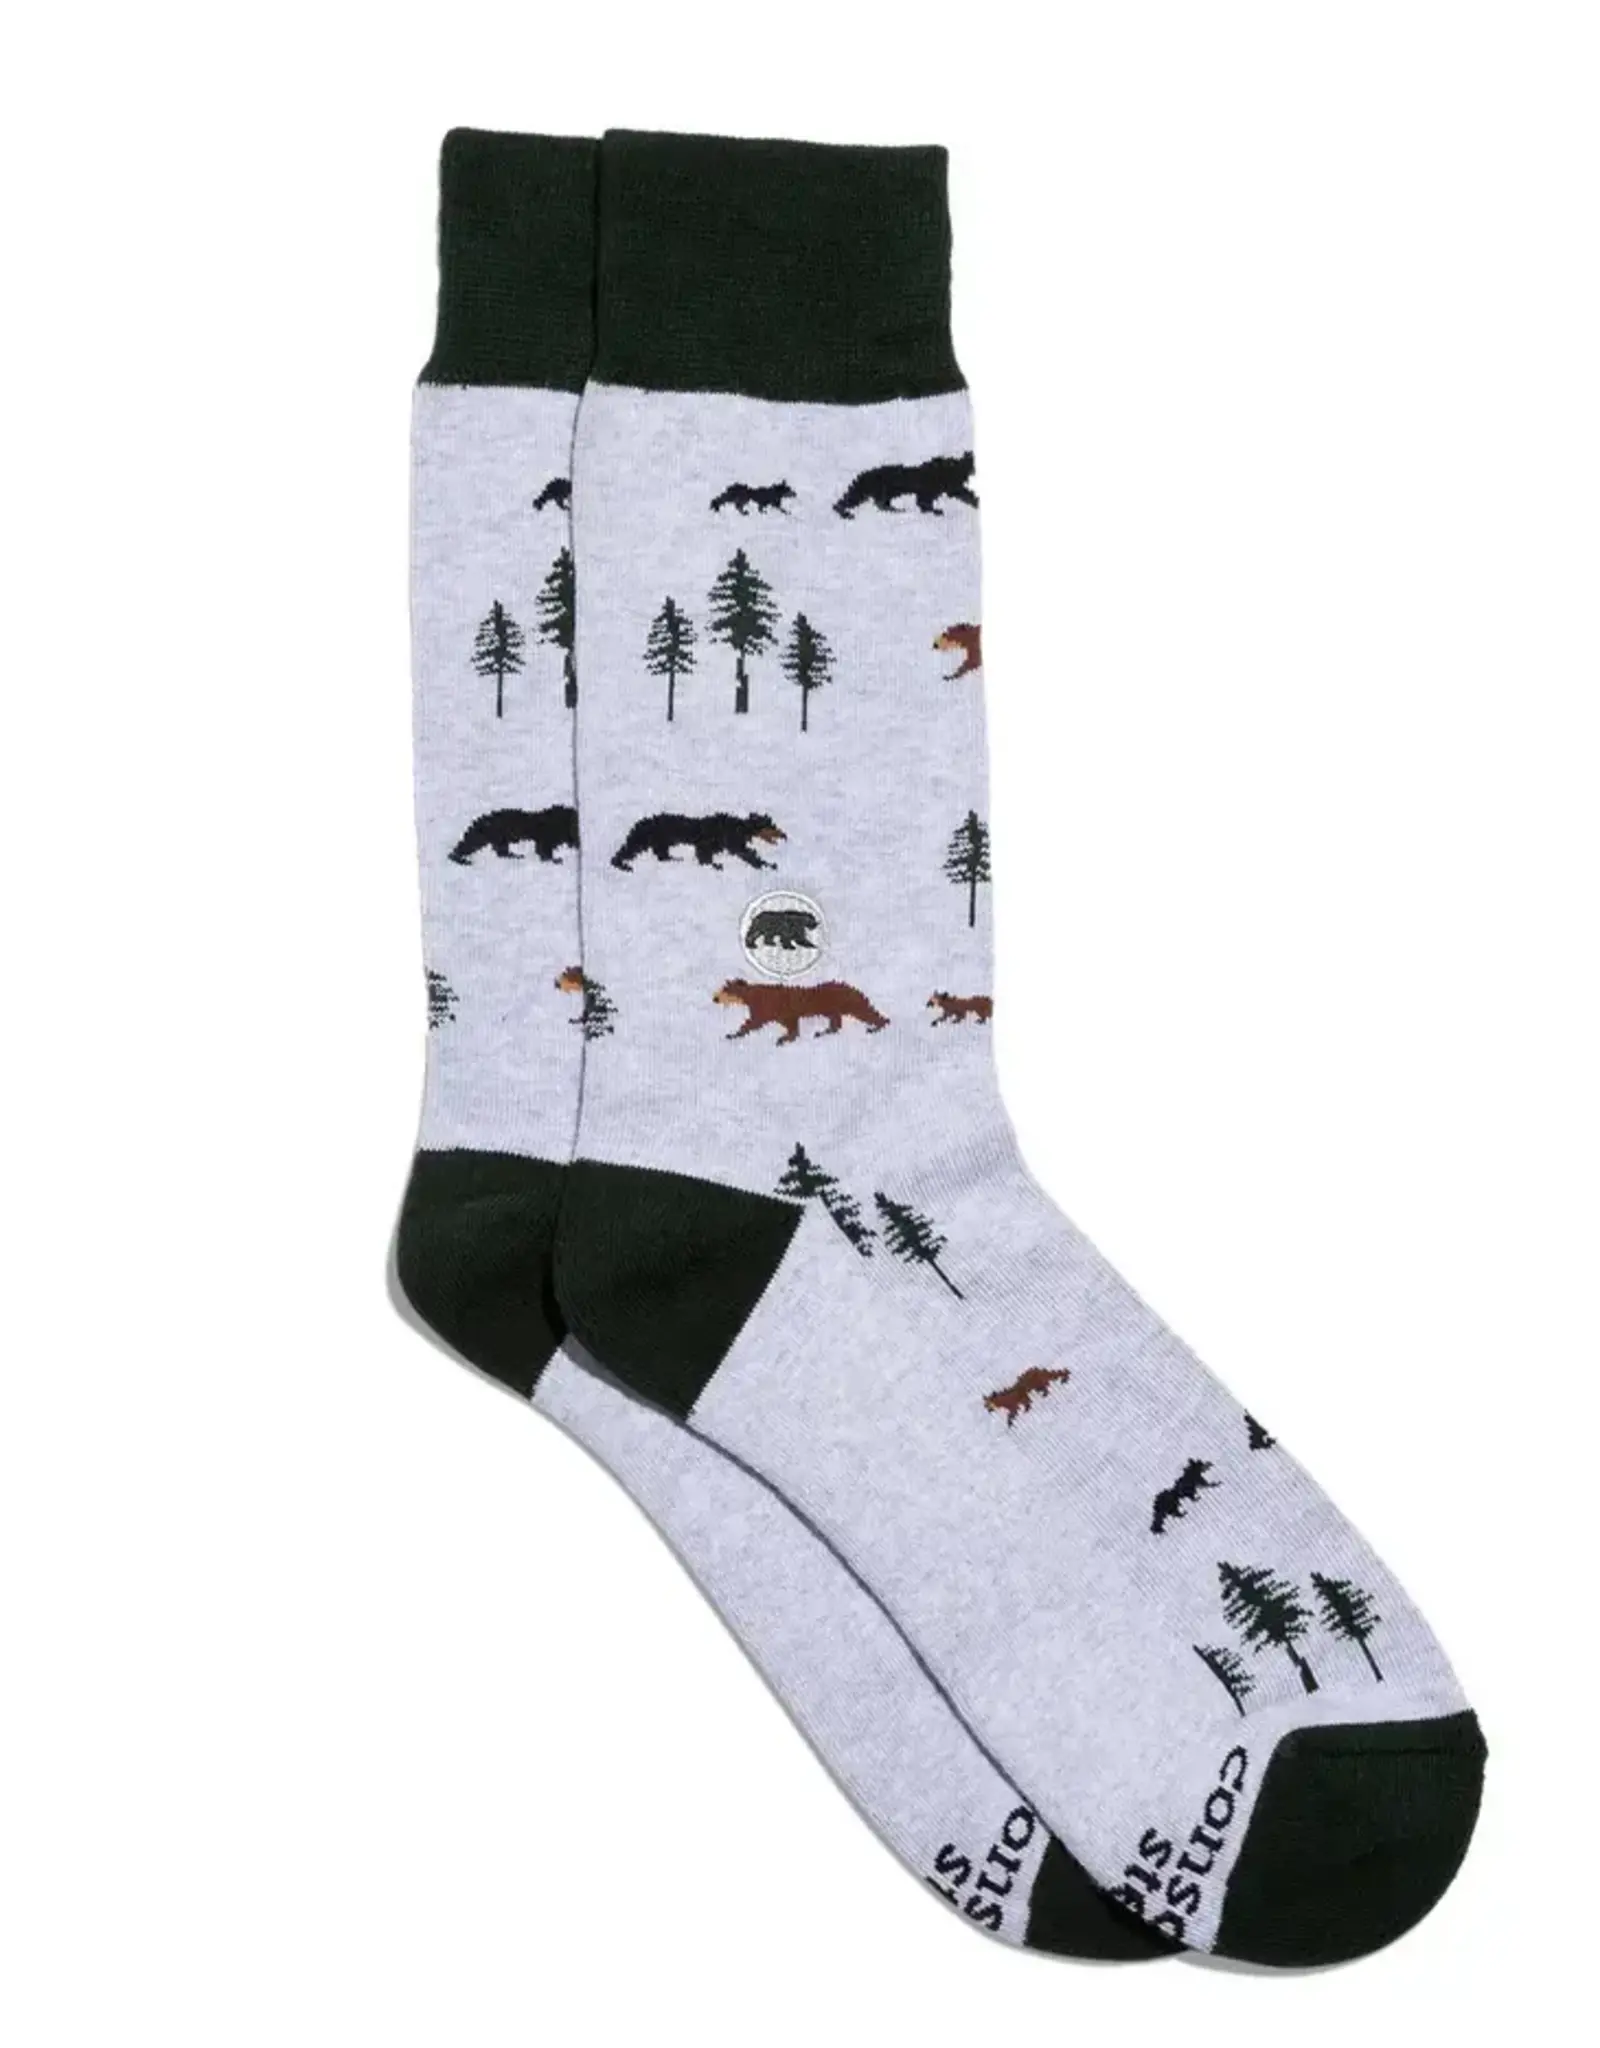 Conscious Step Socks that Protect Bears